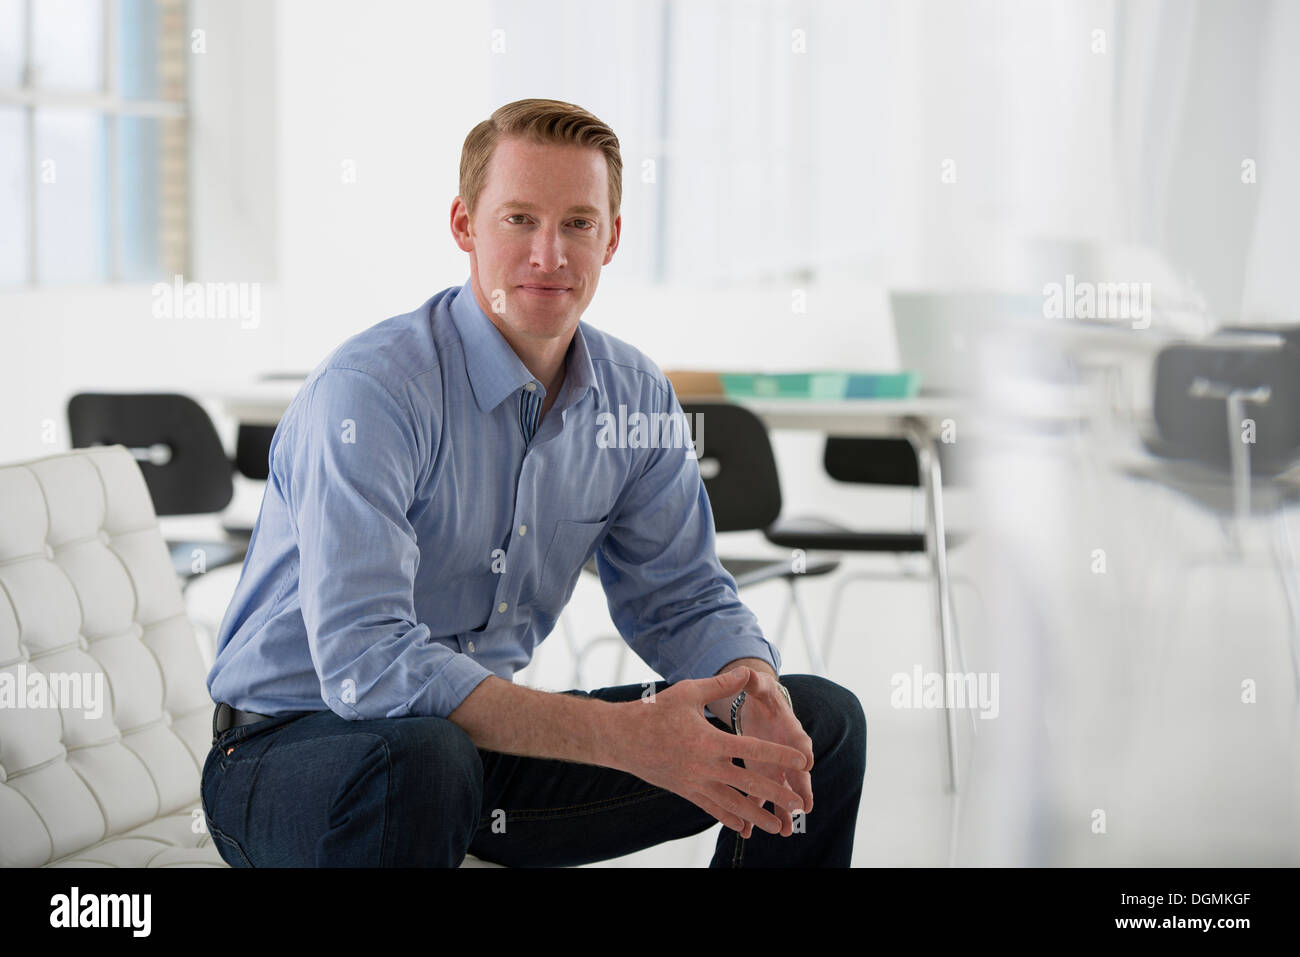 Business. A man in a blue shirt sitting down. Stock Photo